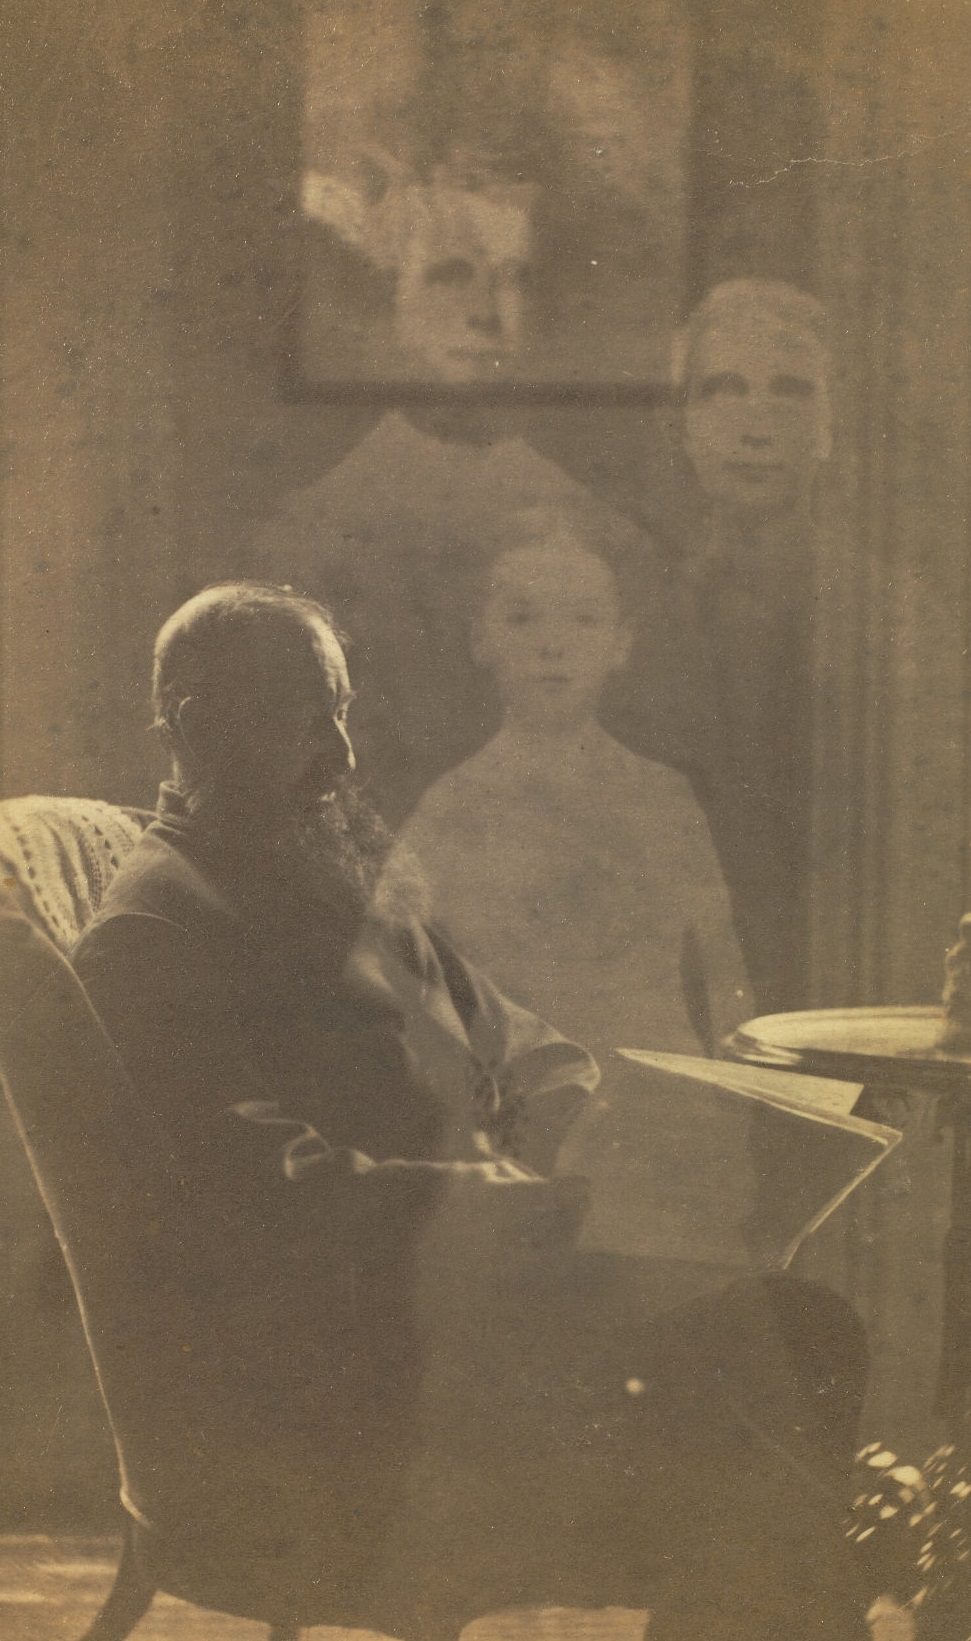 Profile portrait of a man with a beard seated in an upholstered chair, next to a side table. The faint images of three children appear behind him.